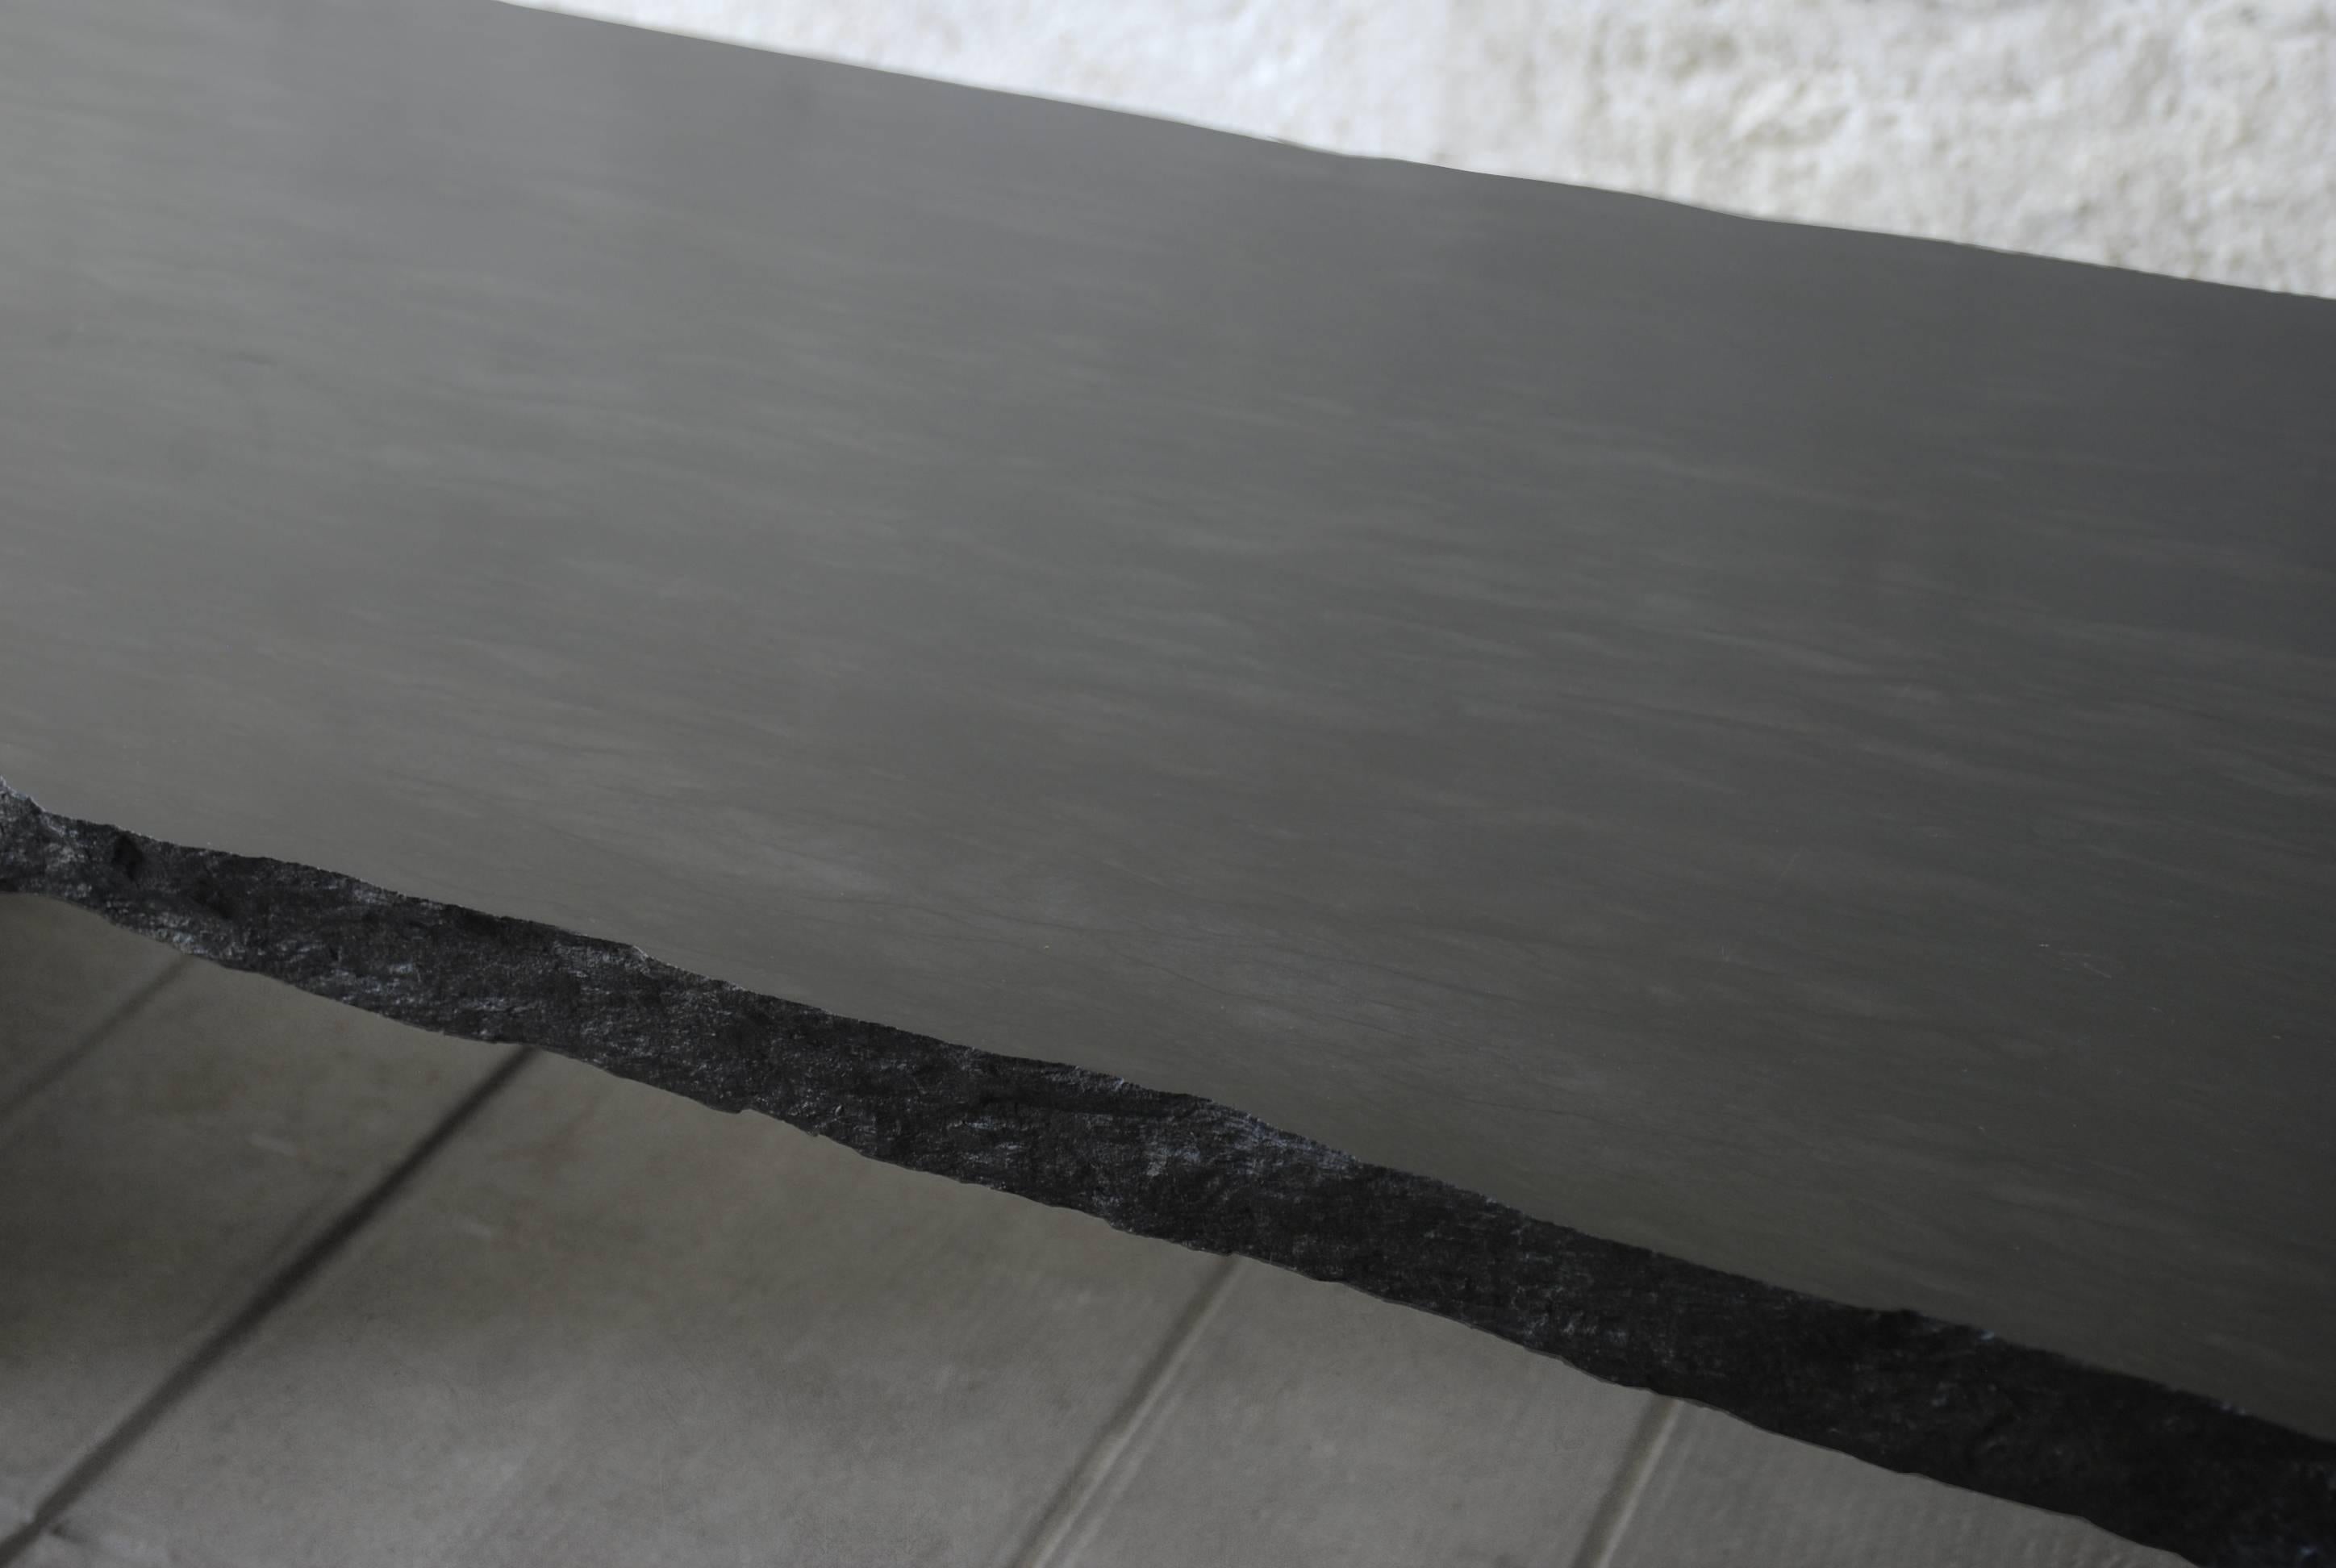 Sculpted marble slate coffee table, Fruste by Frederic Saulou
Designer: Fre´de´ric Saulou.
Materials: Tre´laze´ black slate
Dimensions: W 200 x D 38 x H 50 cm

Edition of 8.
Signed and Numbered.

“While wandering in the streets I have been observing